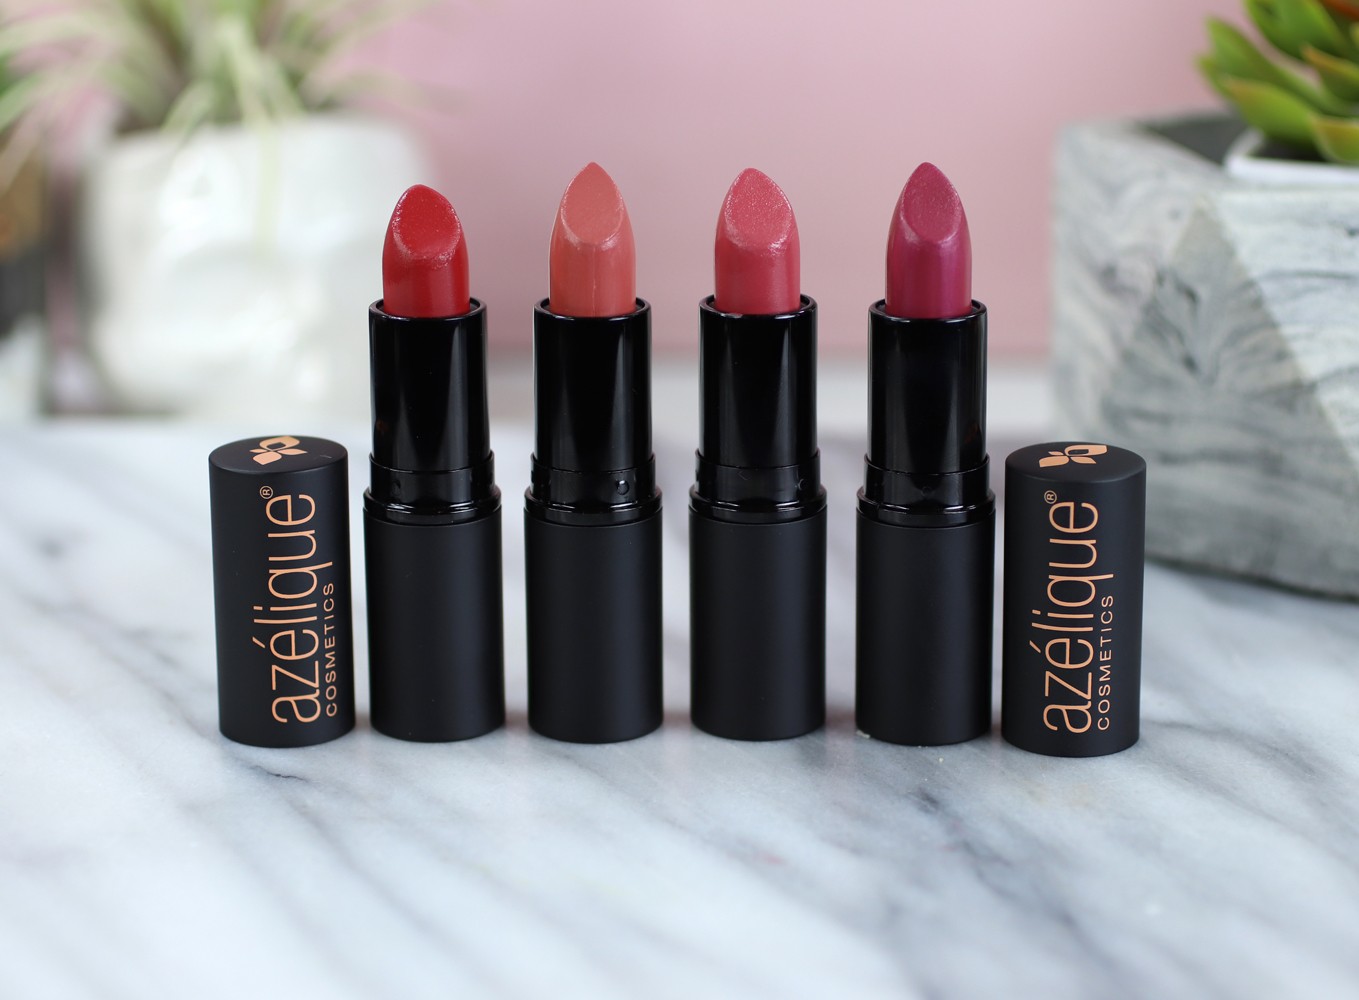 Azelique Cosmetics Lipstick Review - Review of Azelique Cosmetics by Los Angeles cruelty free beauty blogger My Beauty Bunny